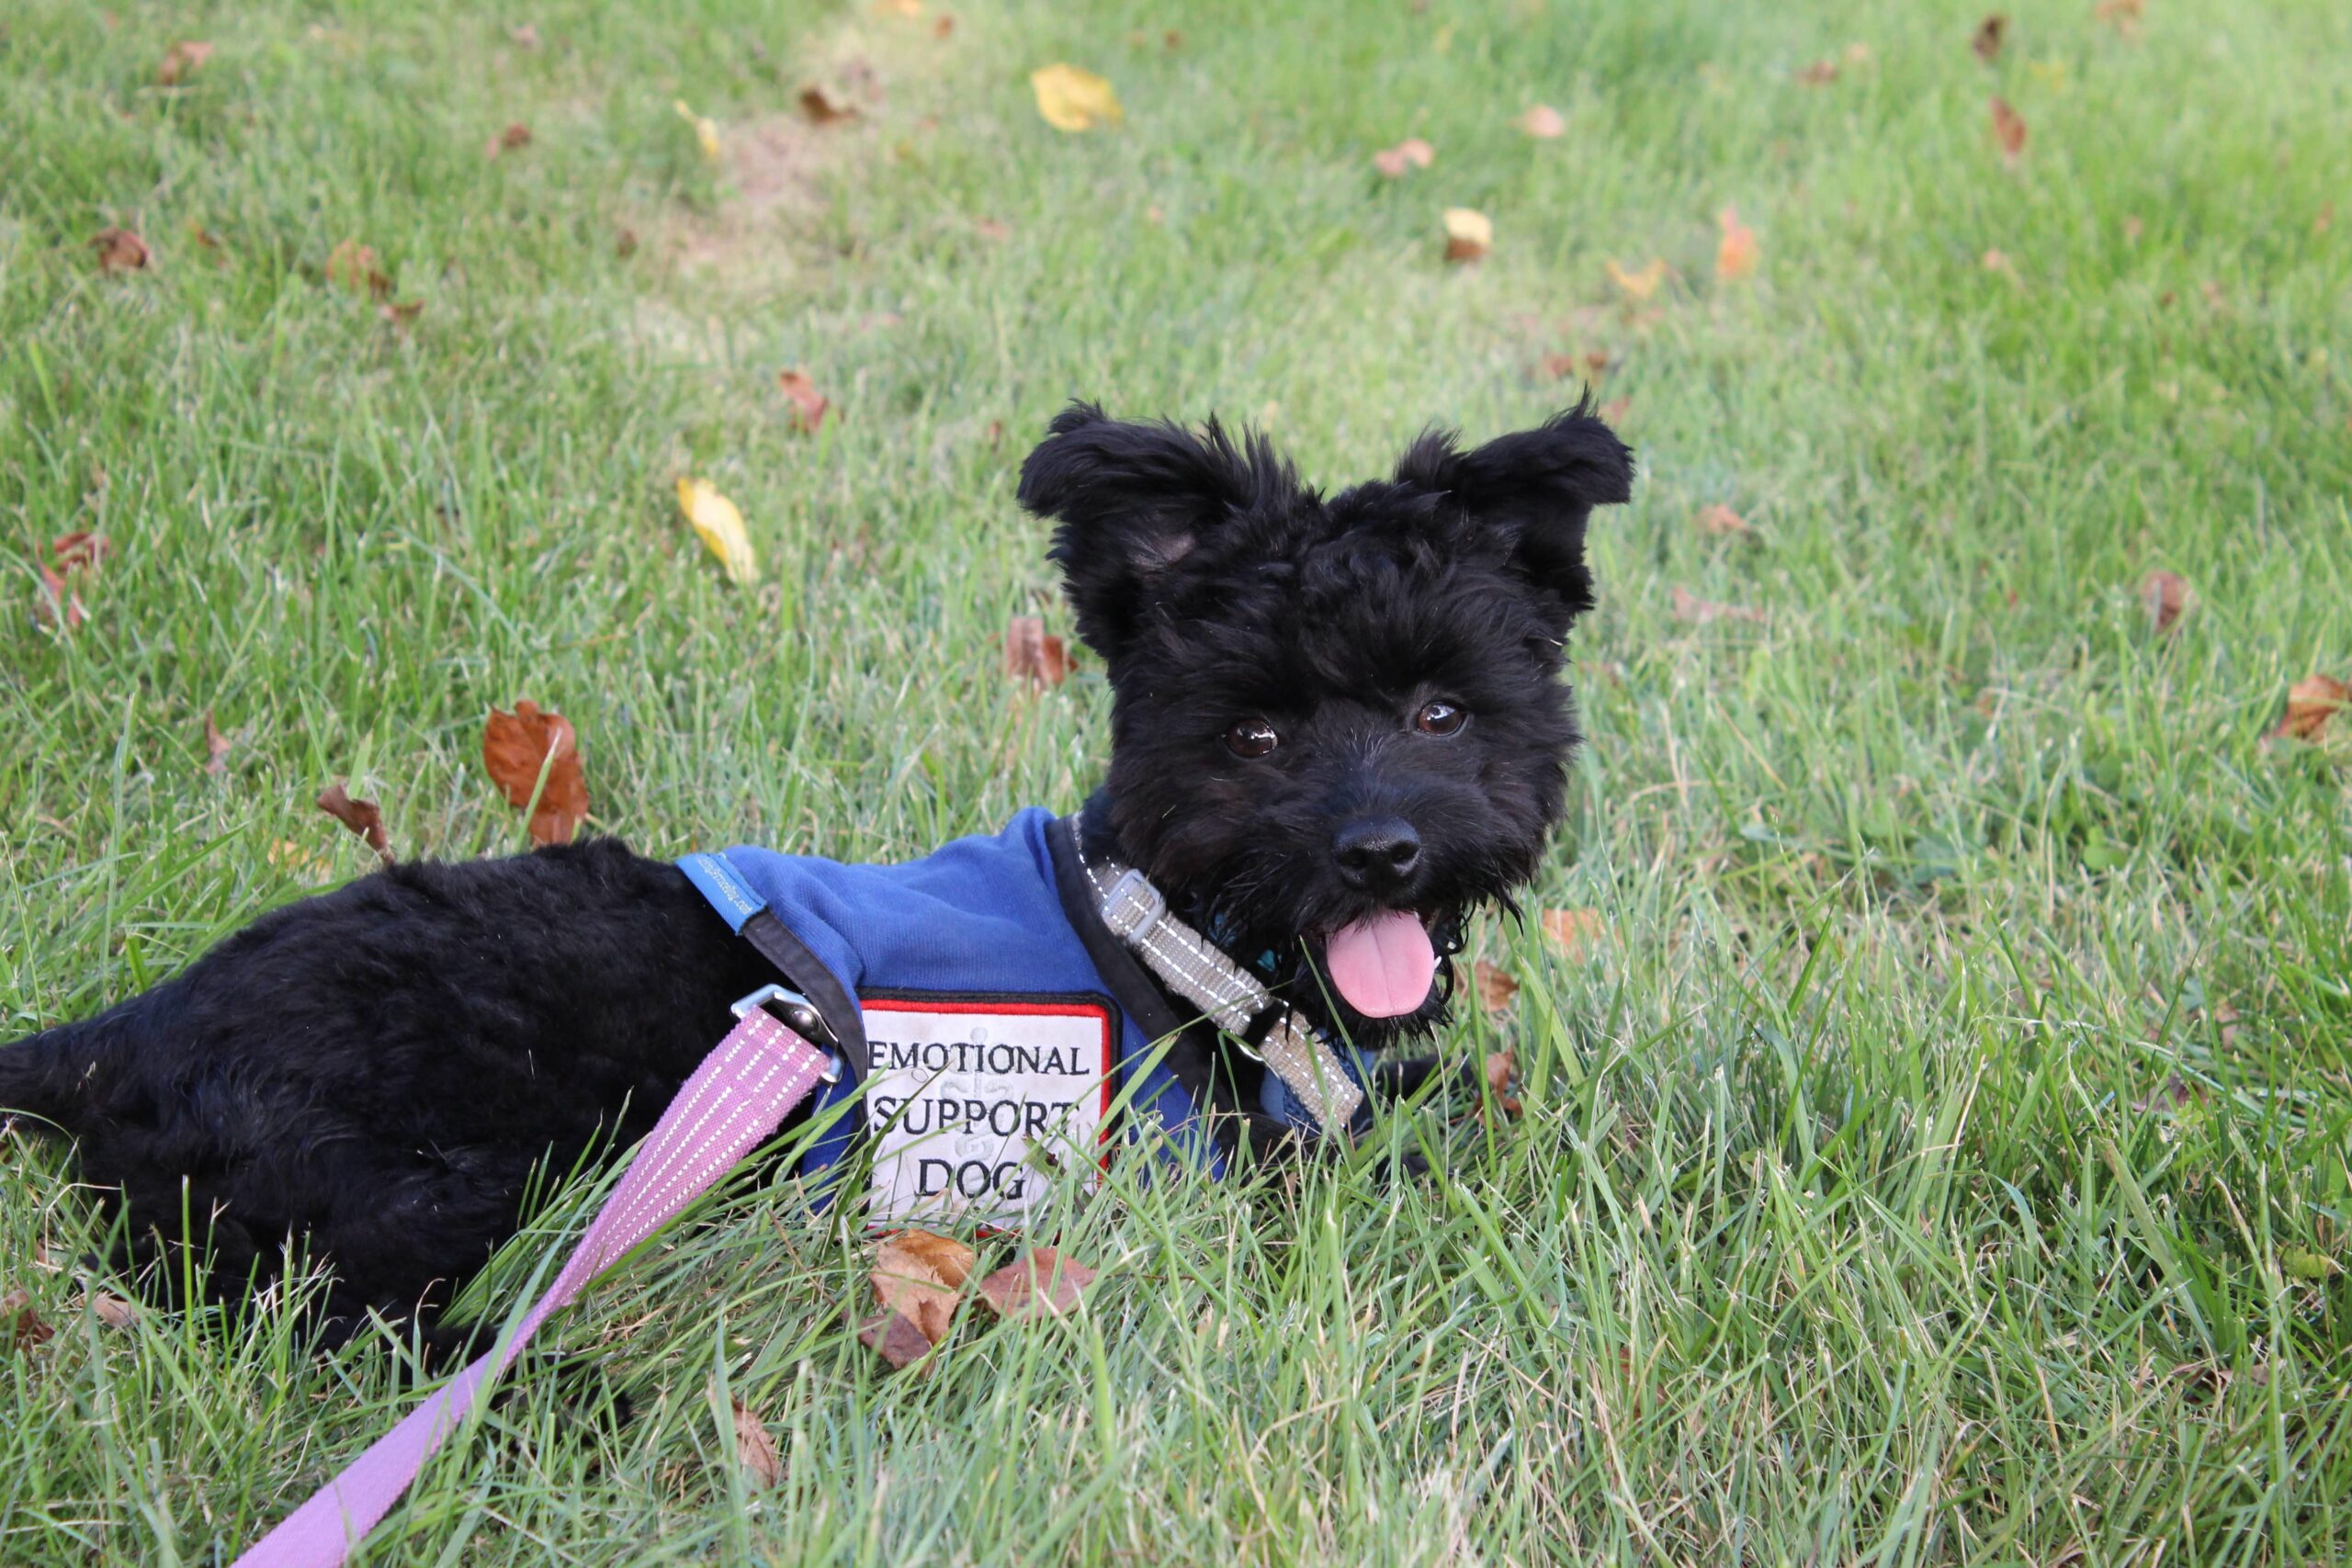 an emotional support dog wearing a harness